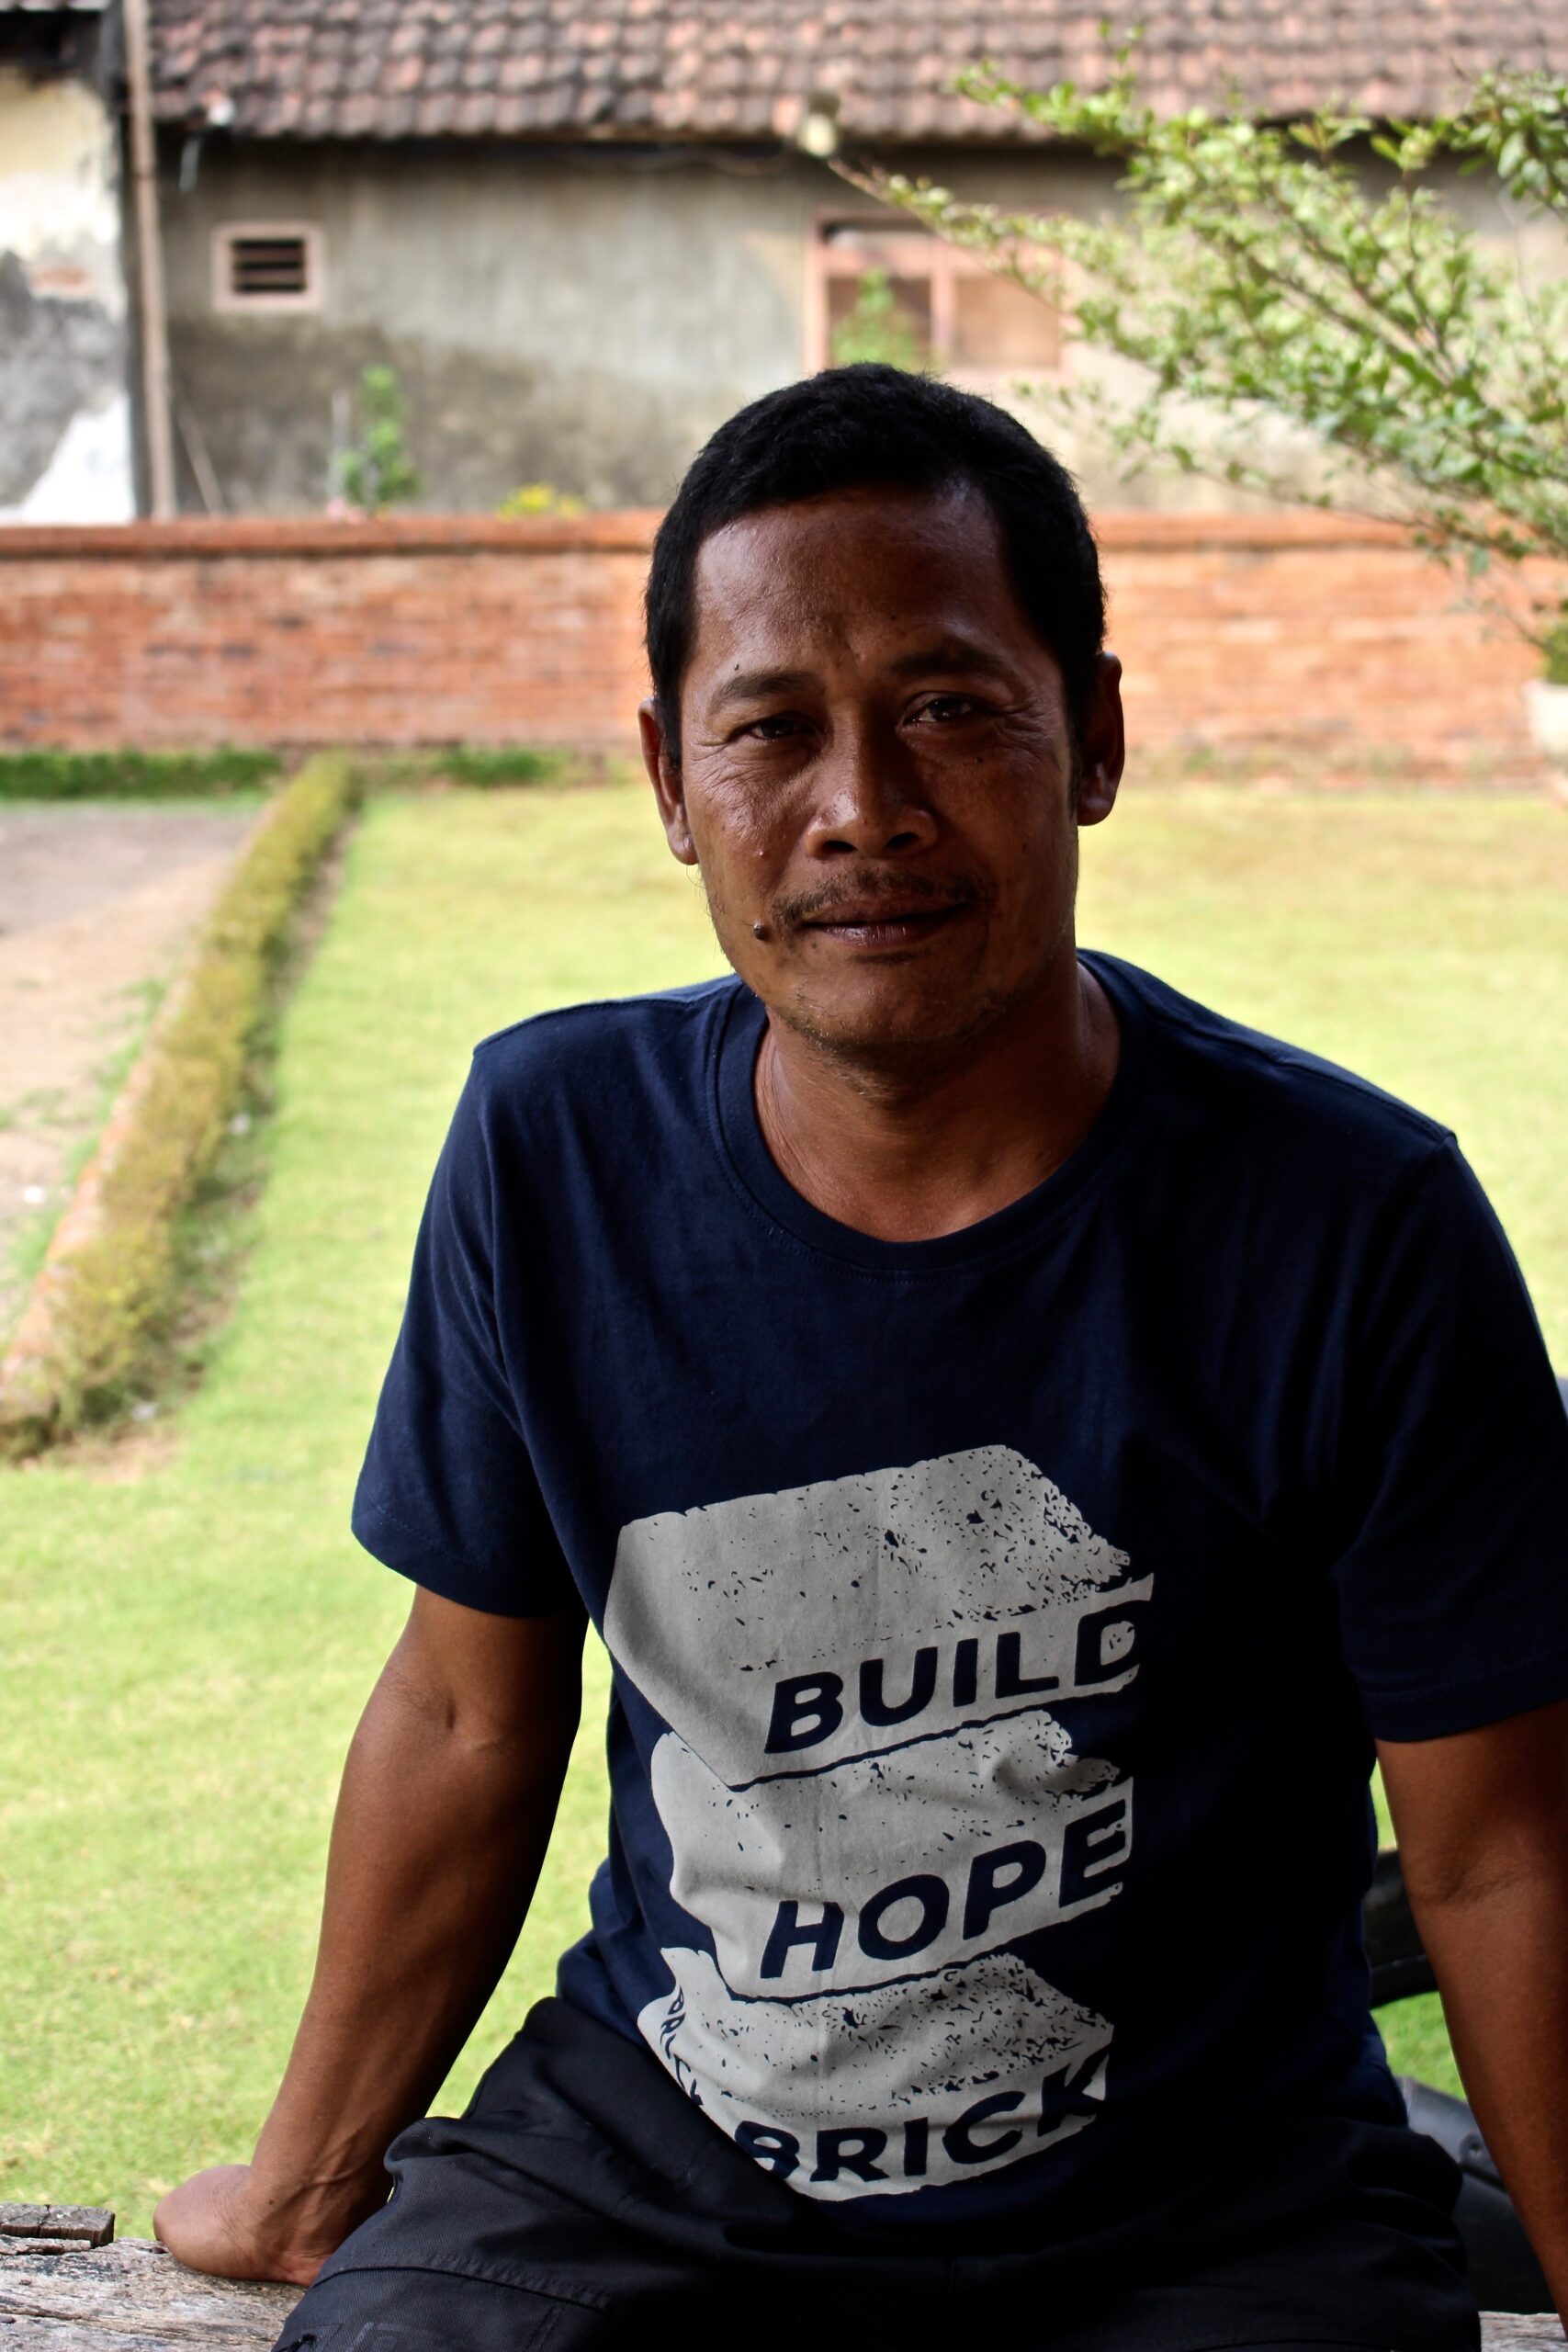 Indonesian man whose heart breaks for the lost